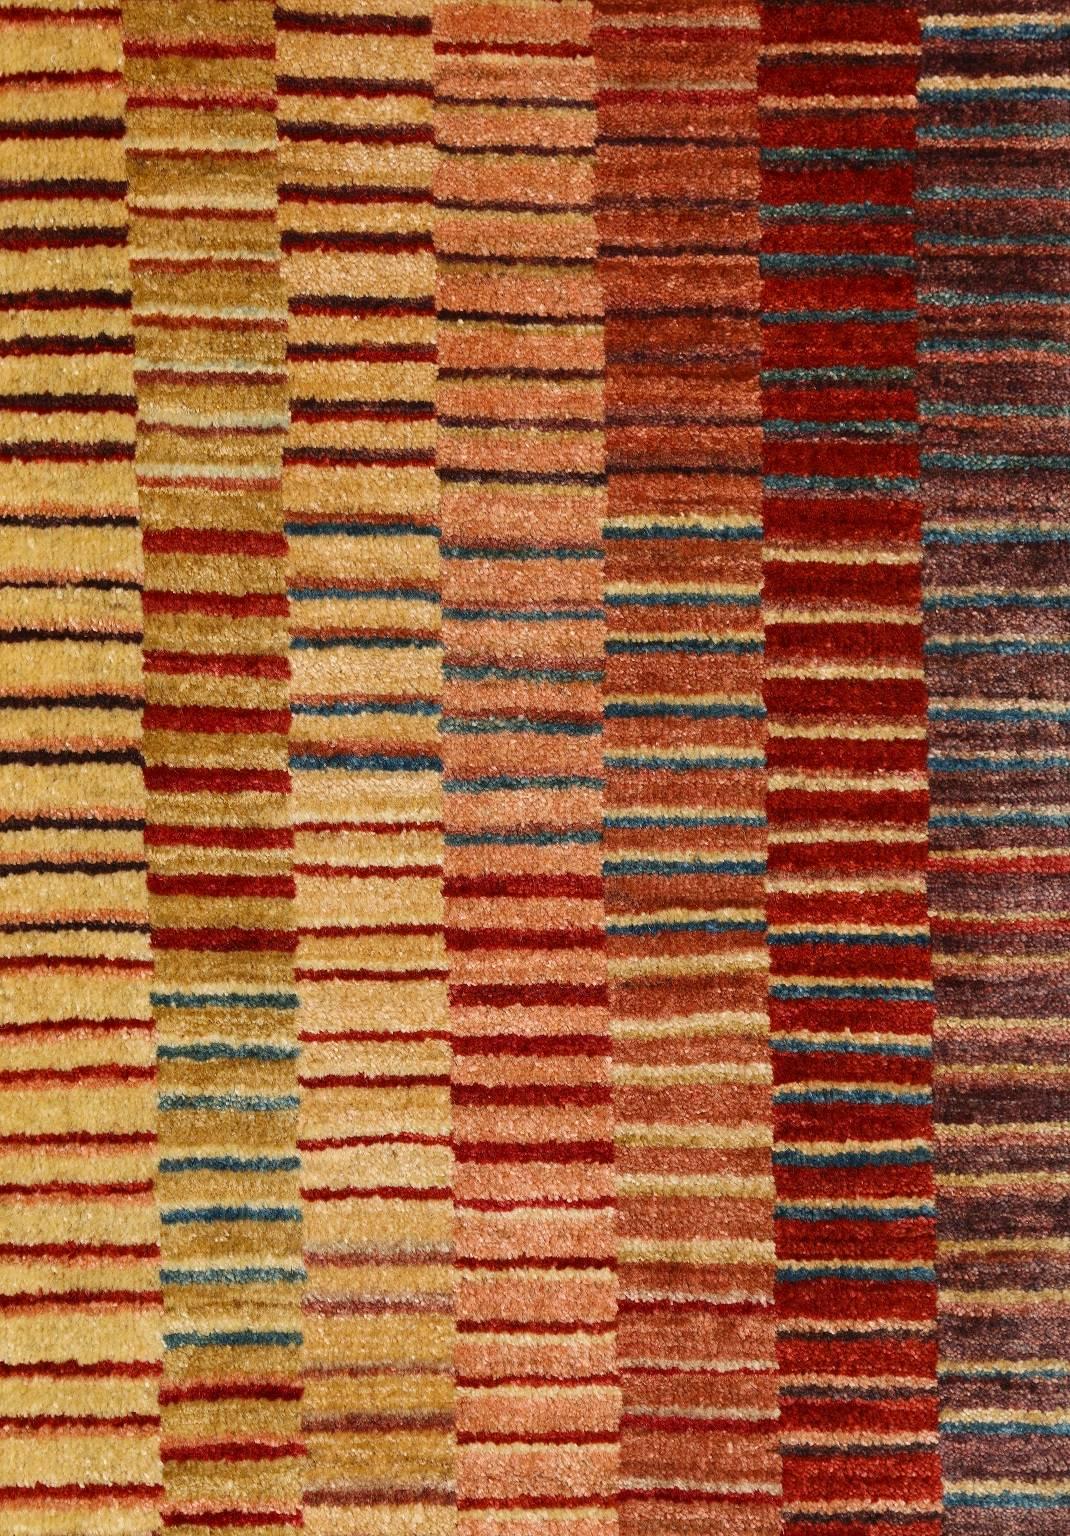 Vegetable Dyed Orley Shabahang Signature Carpet in Handspun Wool and Vegetable Dyes